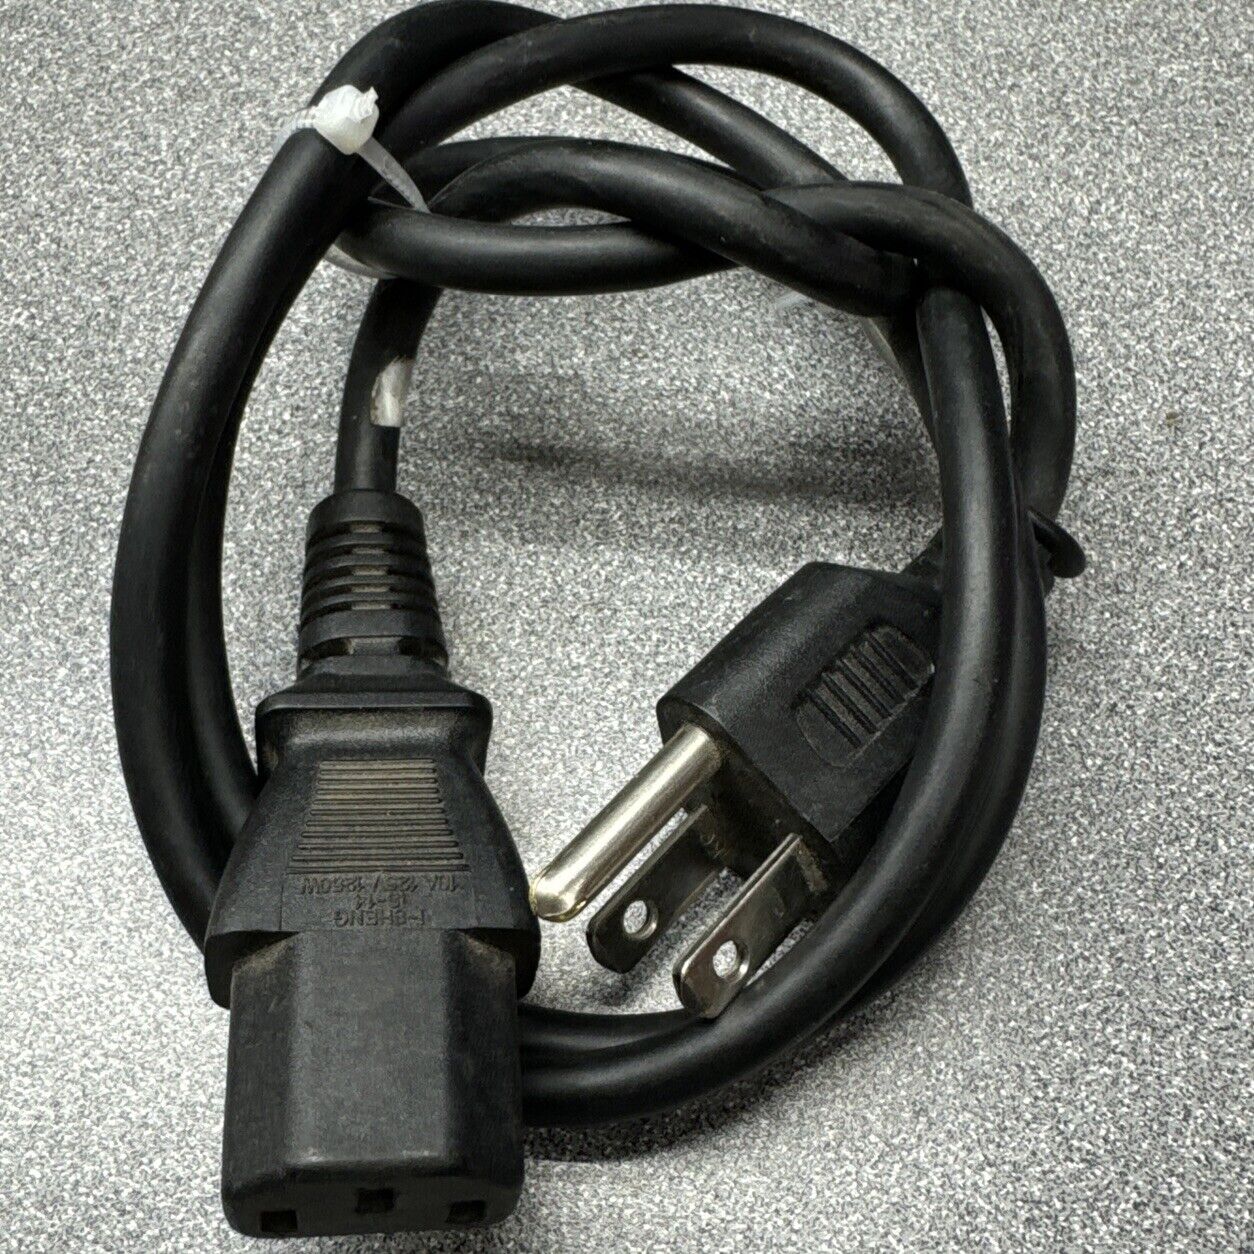 “PARTS” [i-sheng] 10A 125v 1250w Power Cord Cable] [Black, 3 Ft]  